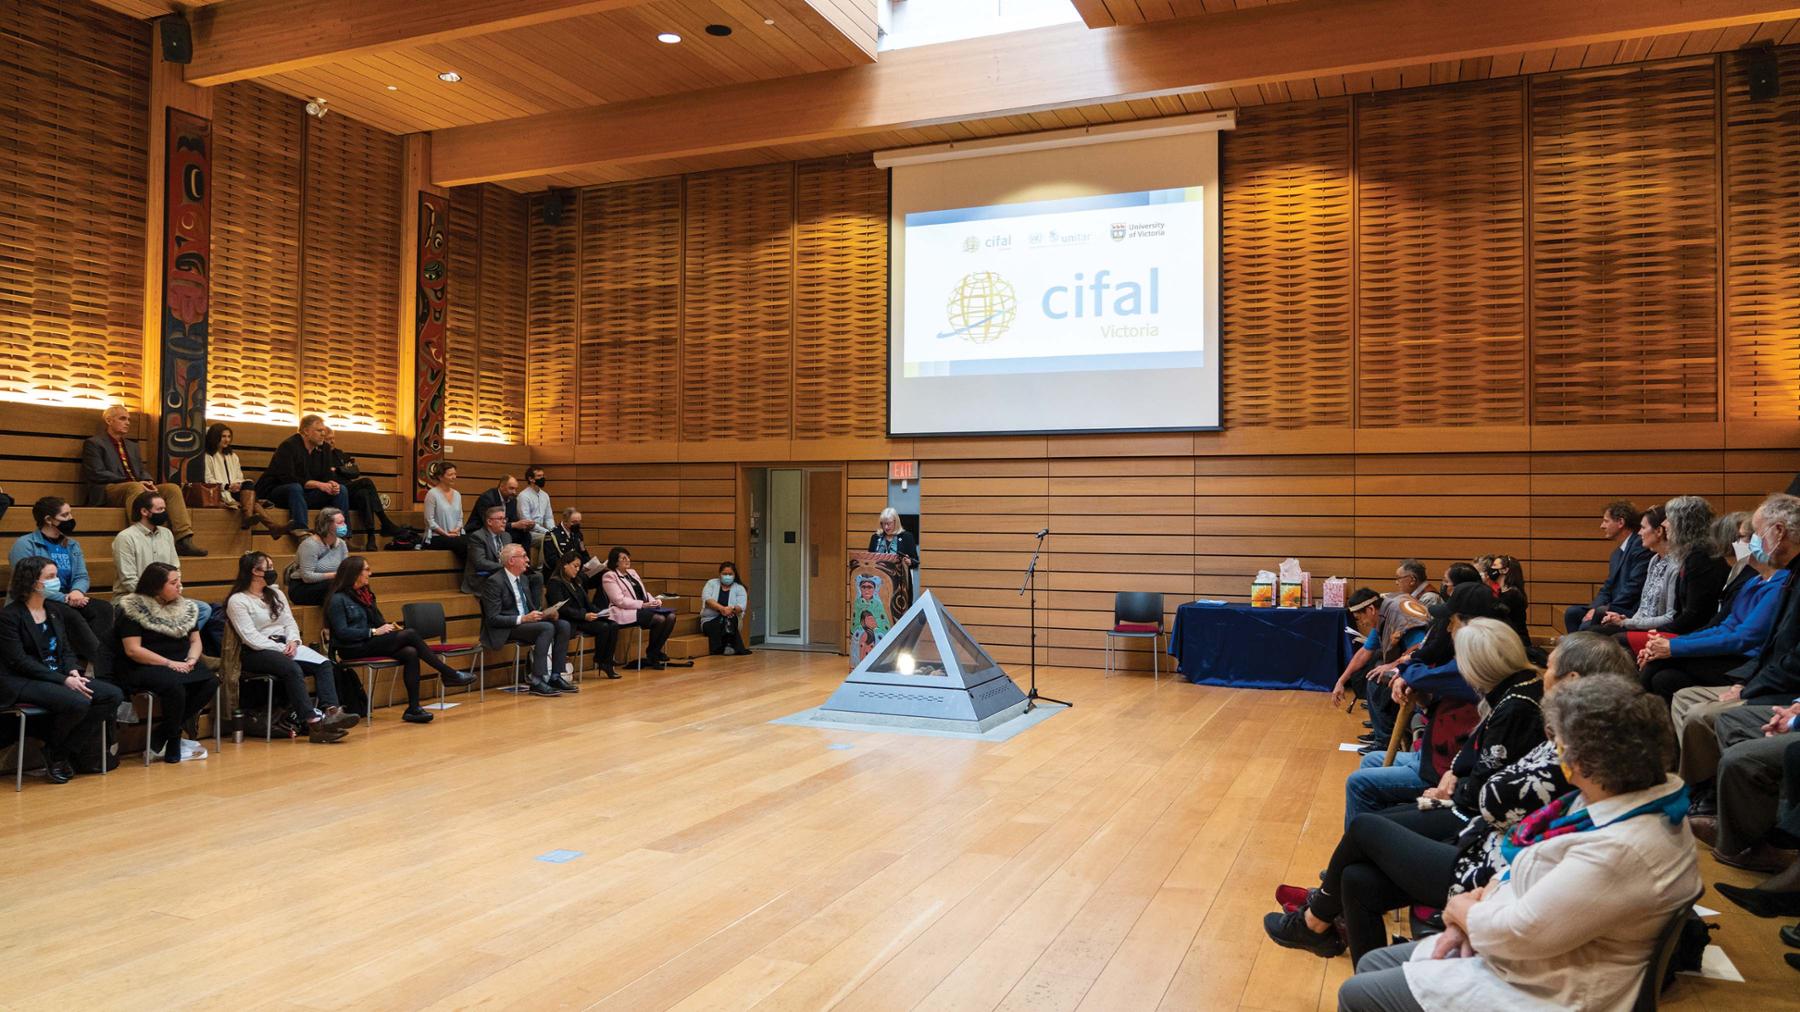 Cifal Victoria was officially launched in March 2022 at First Peoples House at UVic